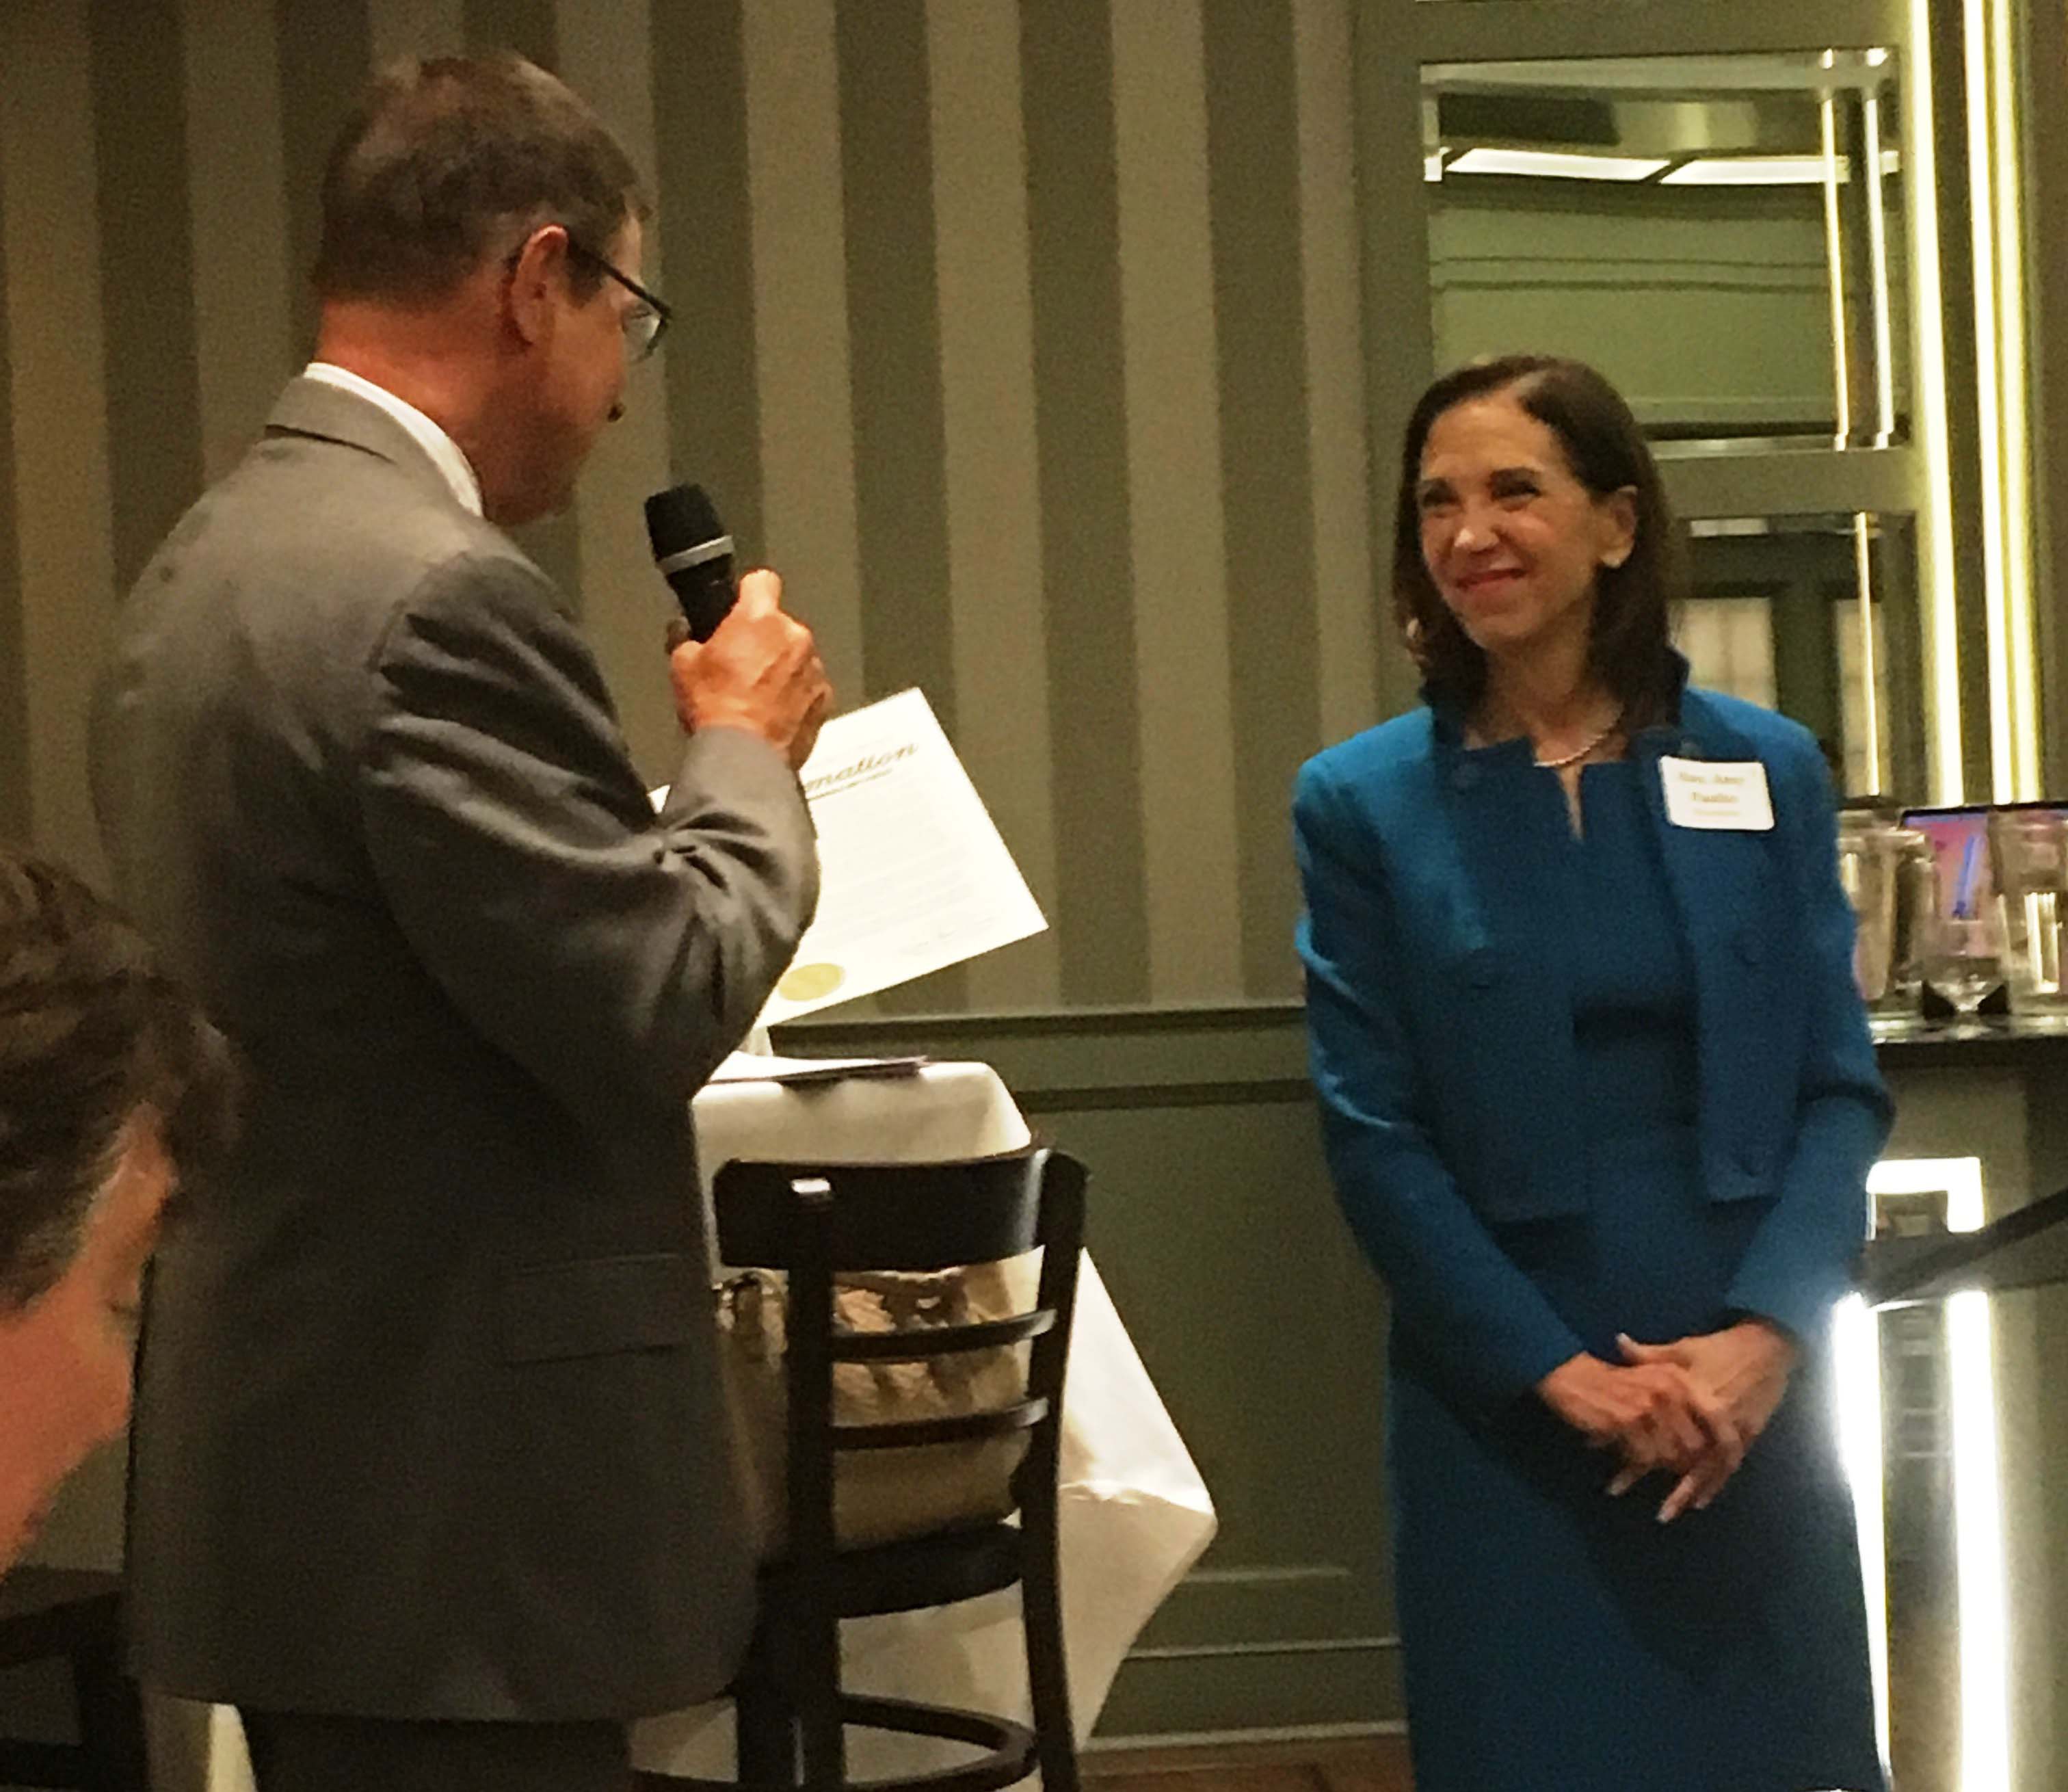 Assemblymember Amy Paulin was honored at the Westchester Regional Benefit for New Yorkers Against Gun Violence Education Fund on April 26, 2018. The event also honored former NYAGV Executive Director